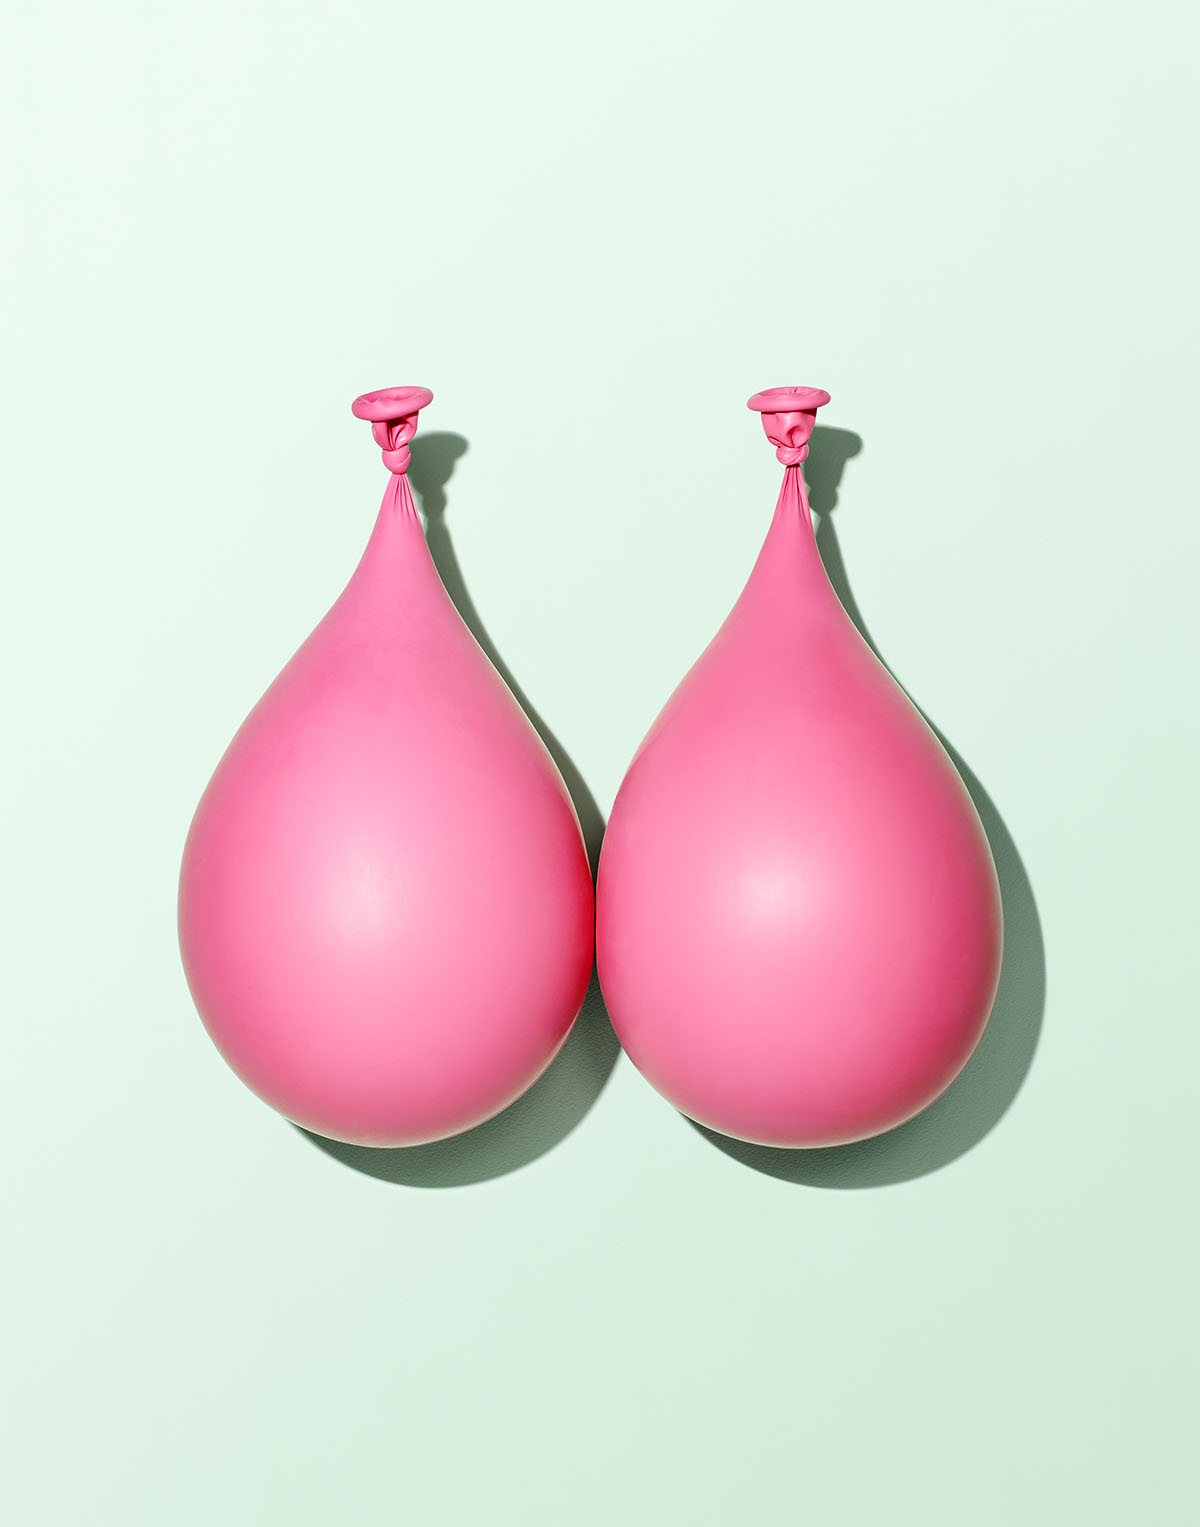 1730_Parents_Breast_Balloon_Final_cropped_W